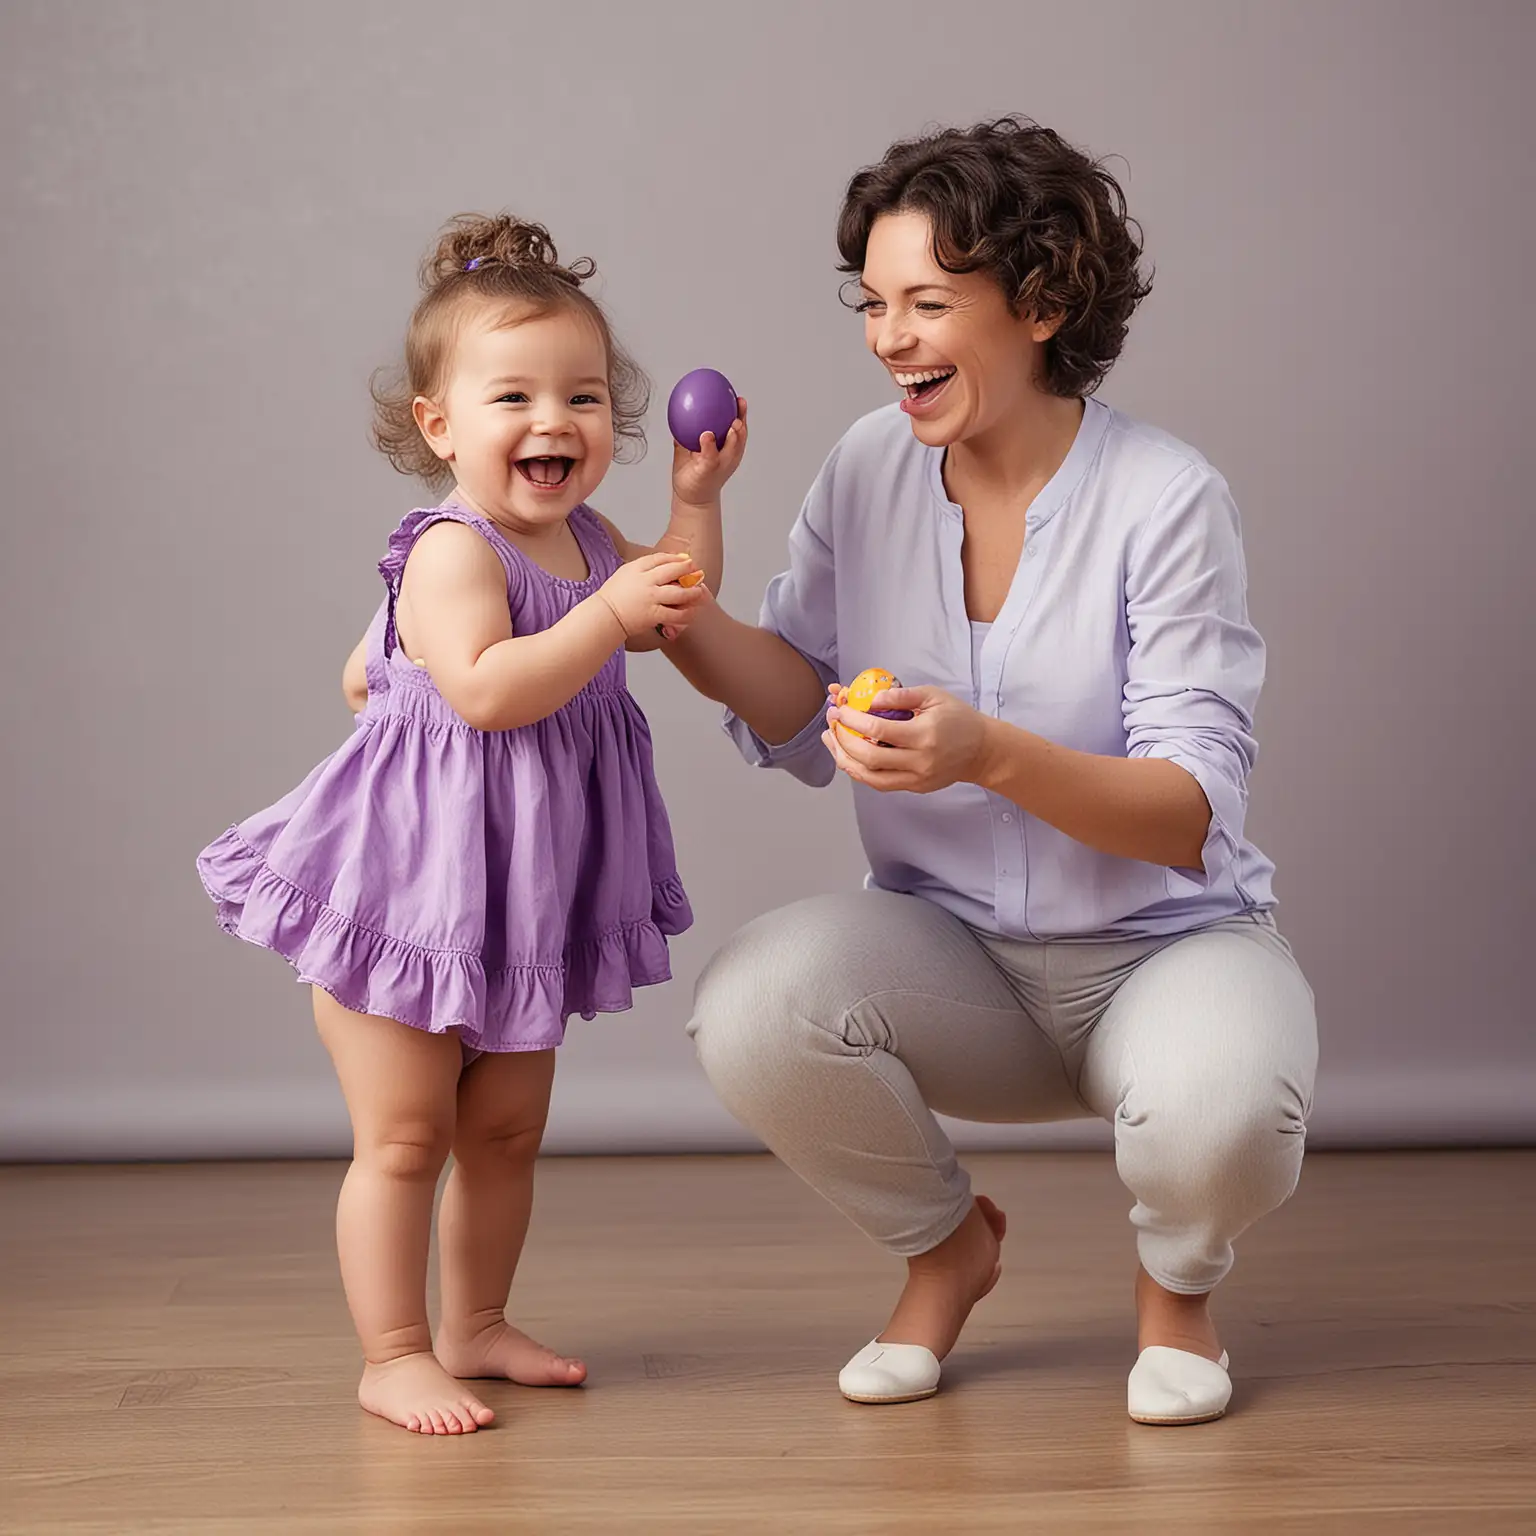 parent and toddler. engaging. colorful. whimsical. enjoying each other's company. dancing. fun. inviting. exercise clothing. holding small purple egg shakers. laughing. smiling.
